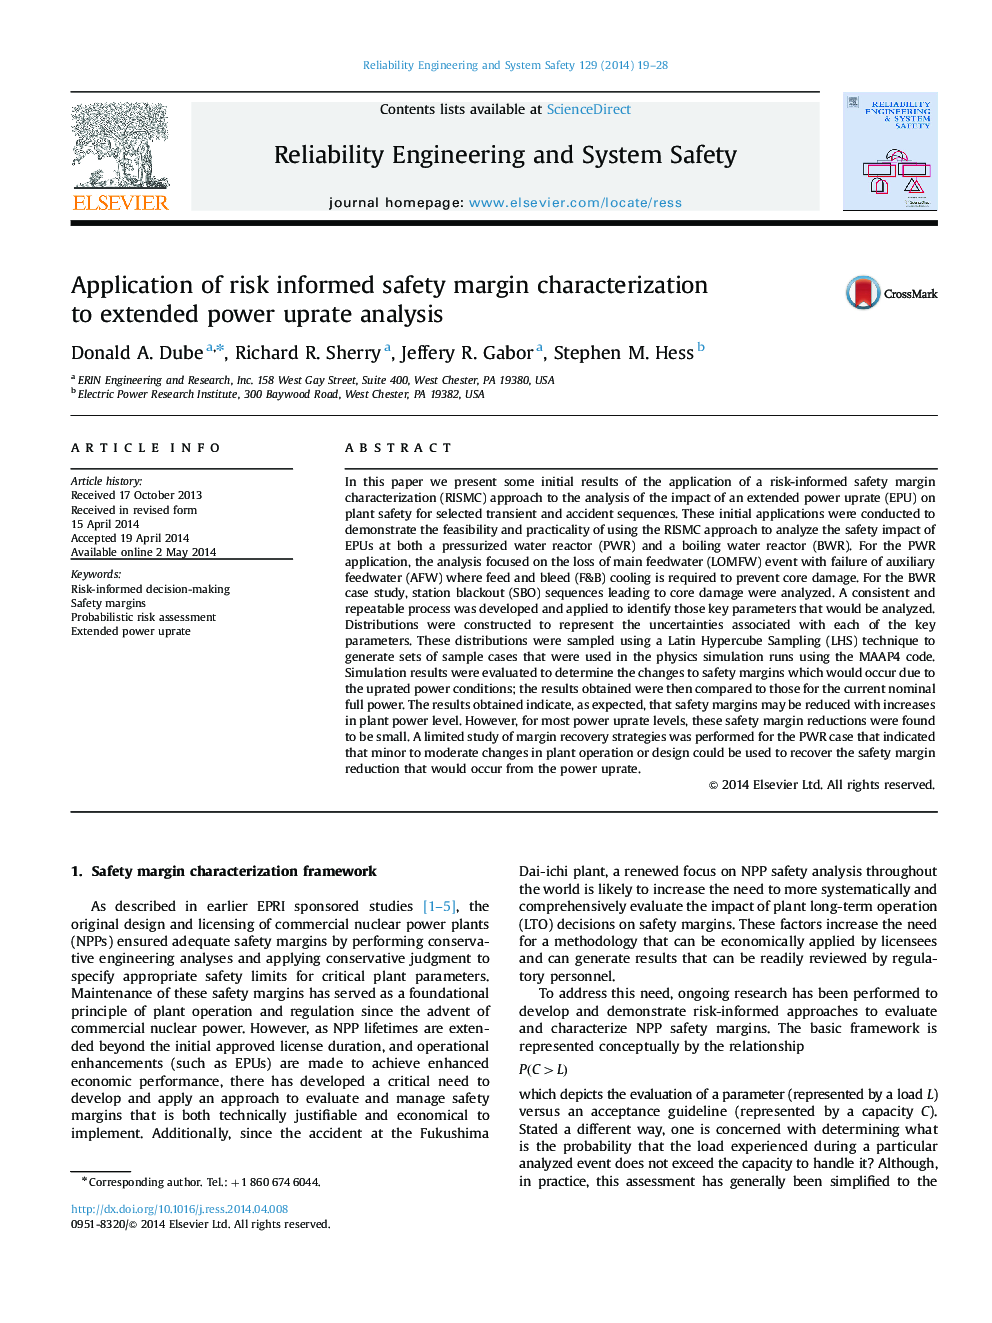 Application of risk informed safety margin characterization to extended power uprate analysis